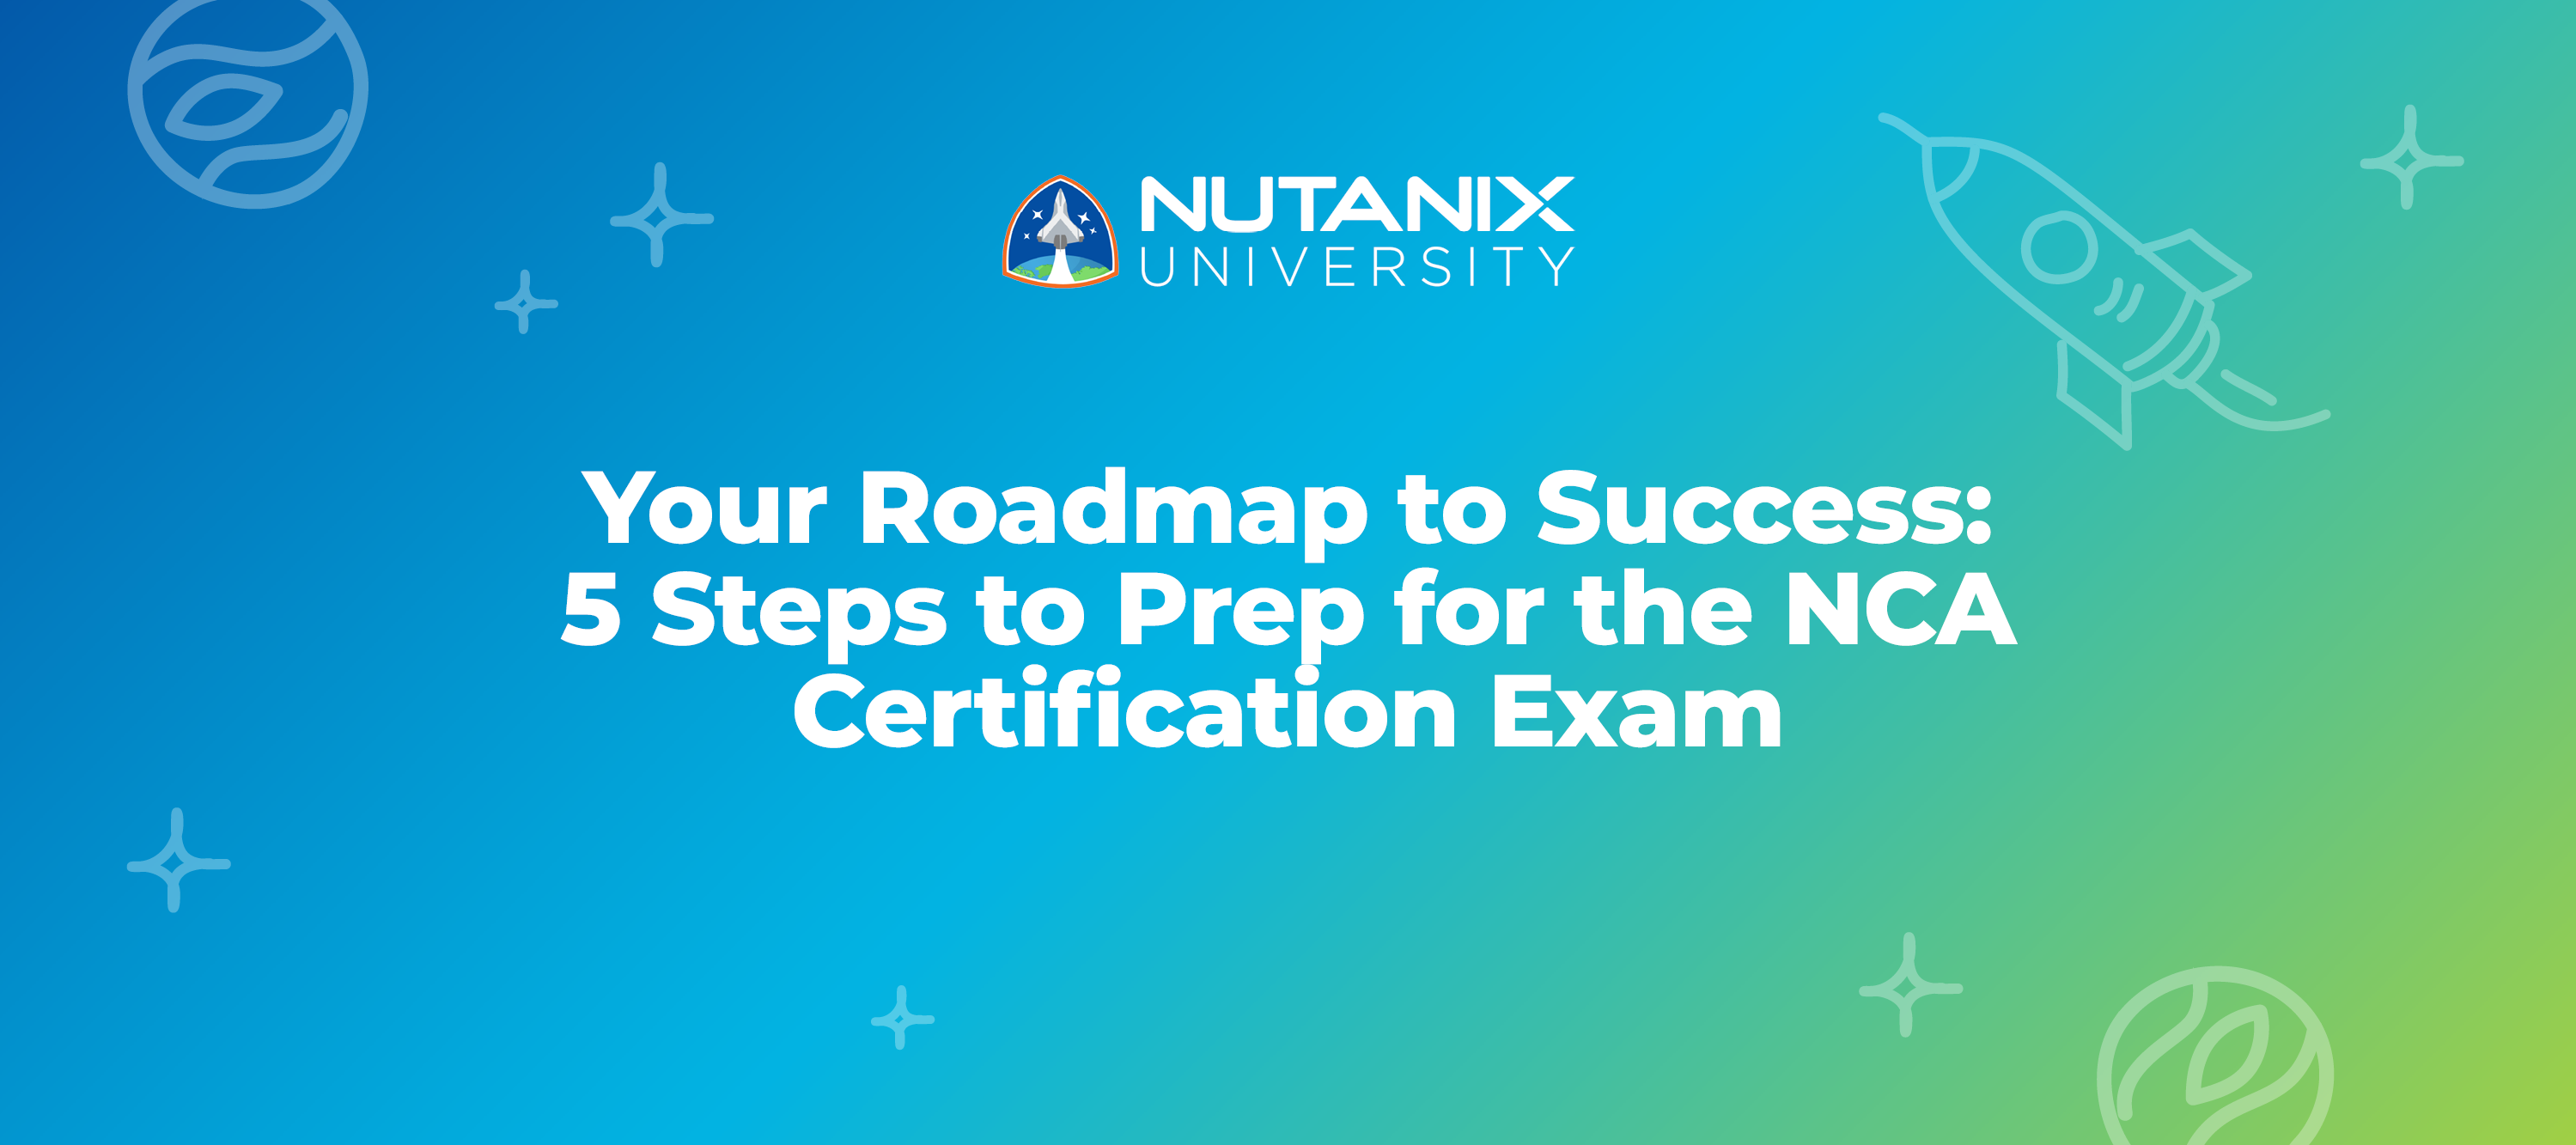 Your Roadmap to Success: 5 Steps to Prep for the NCA Certification Exam